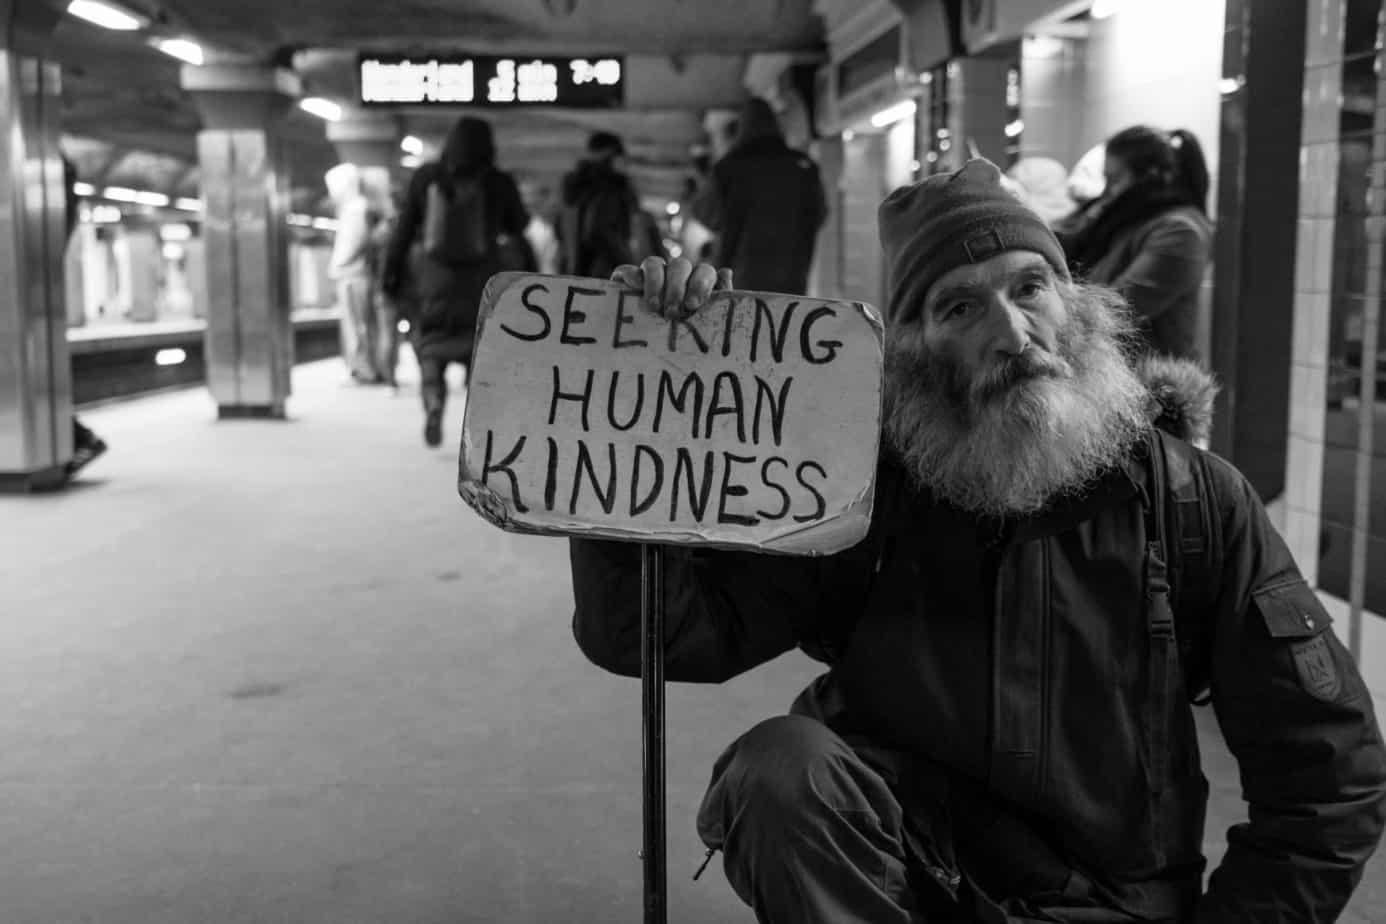 random acts of kindness in daily life